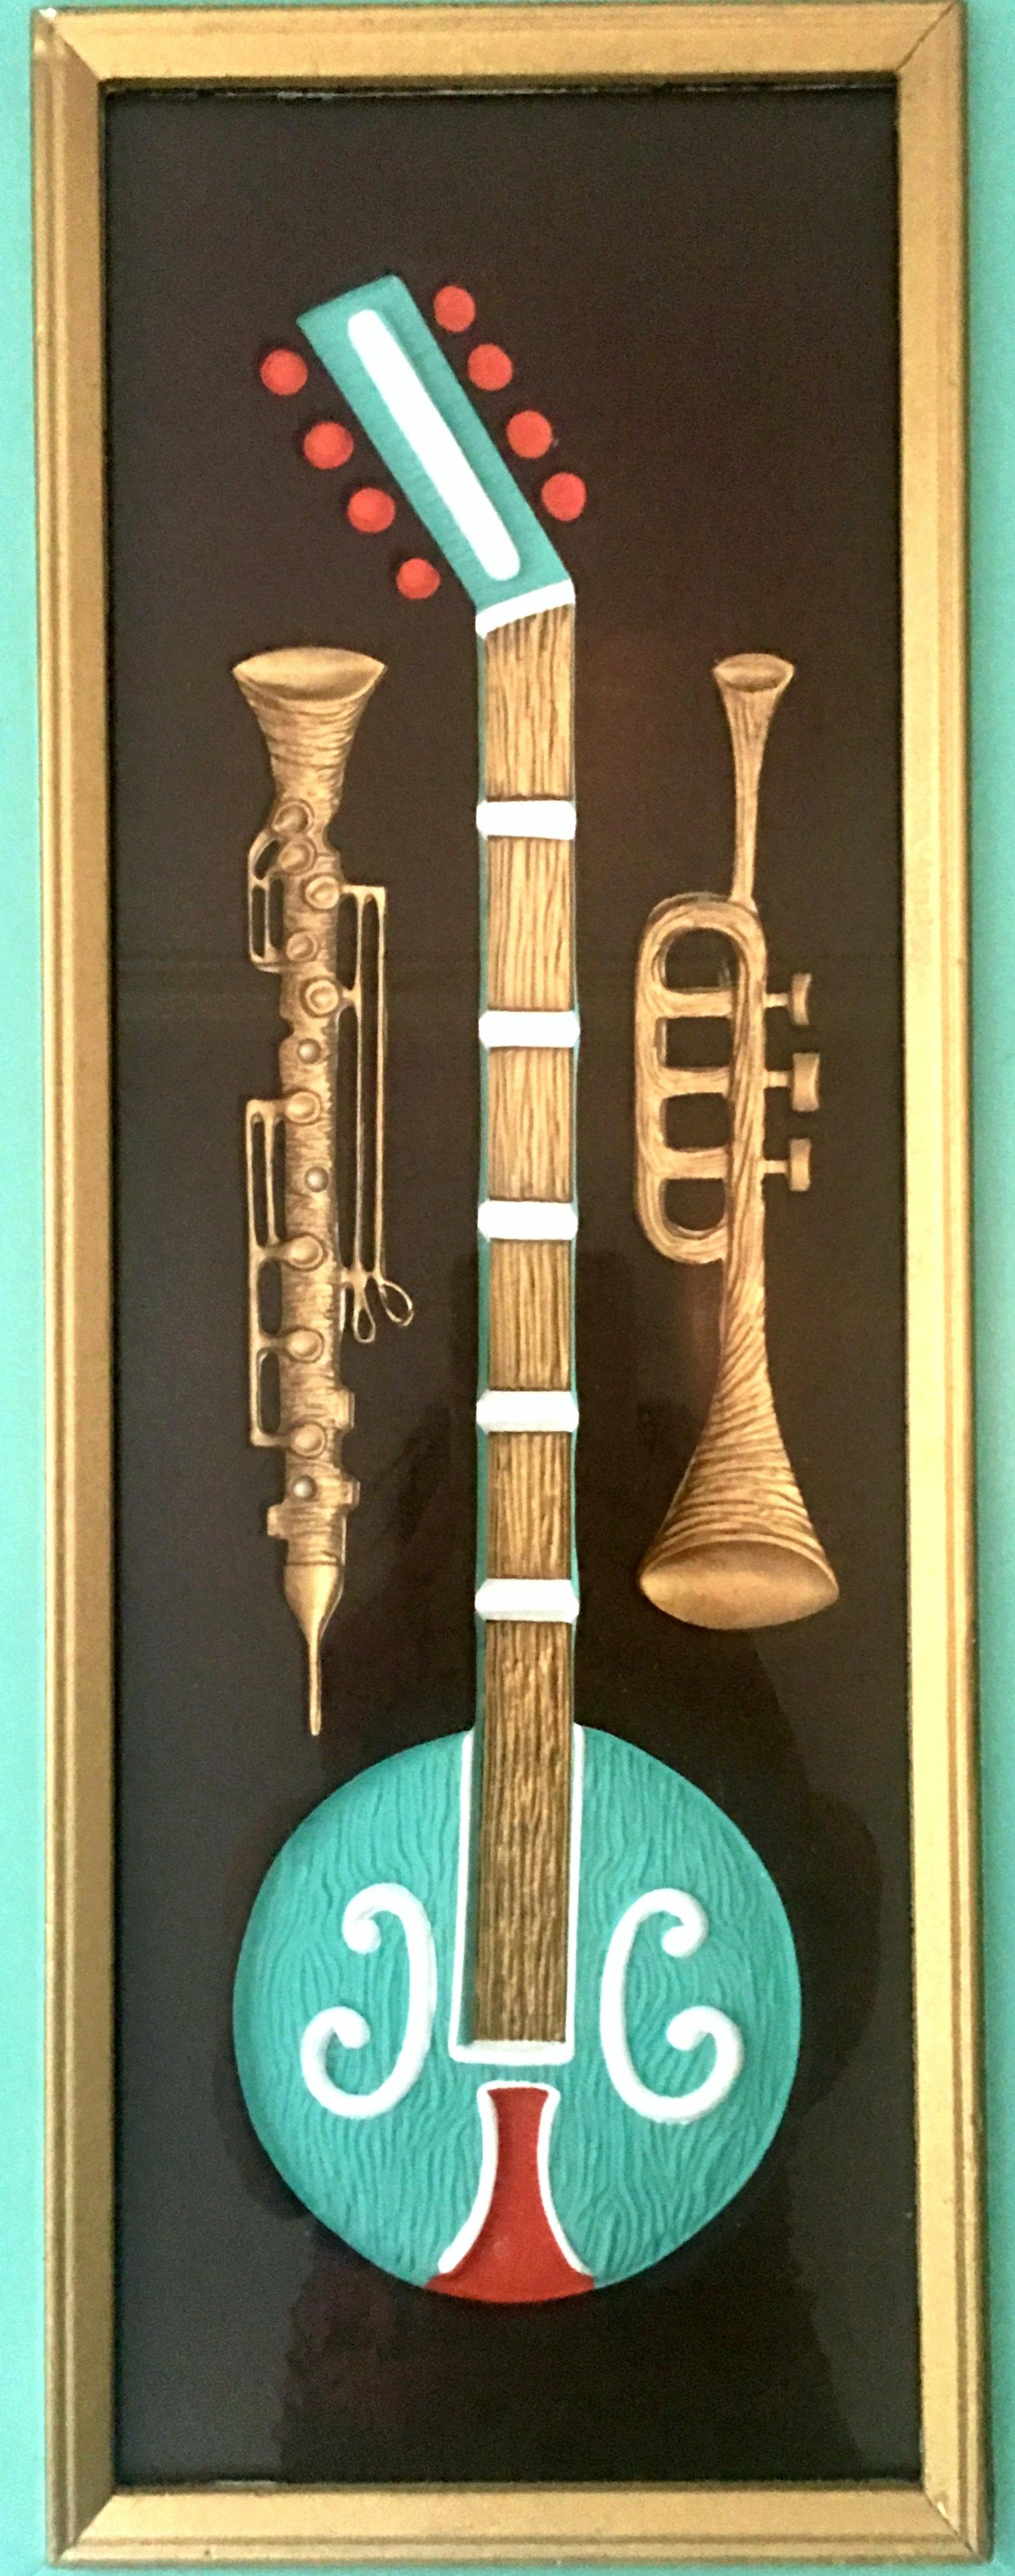 American Midcentury Pair of Musical Instrument Shadow Box Painted Art by, Turner